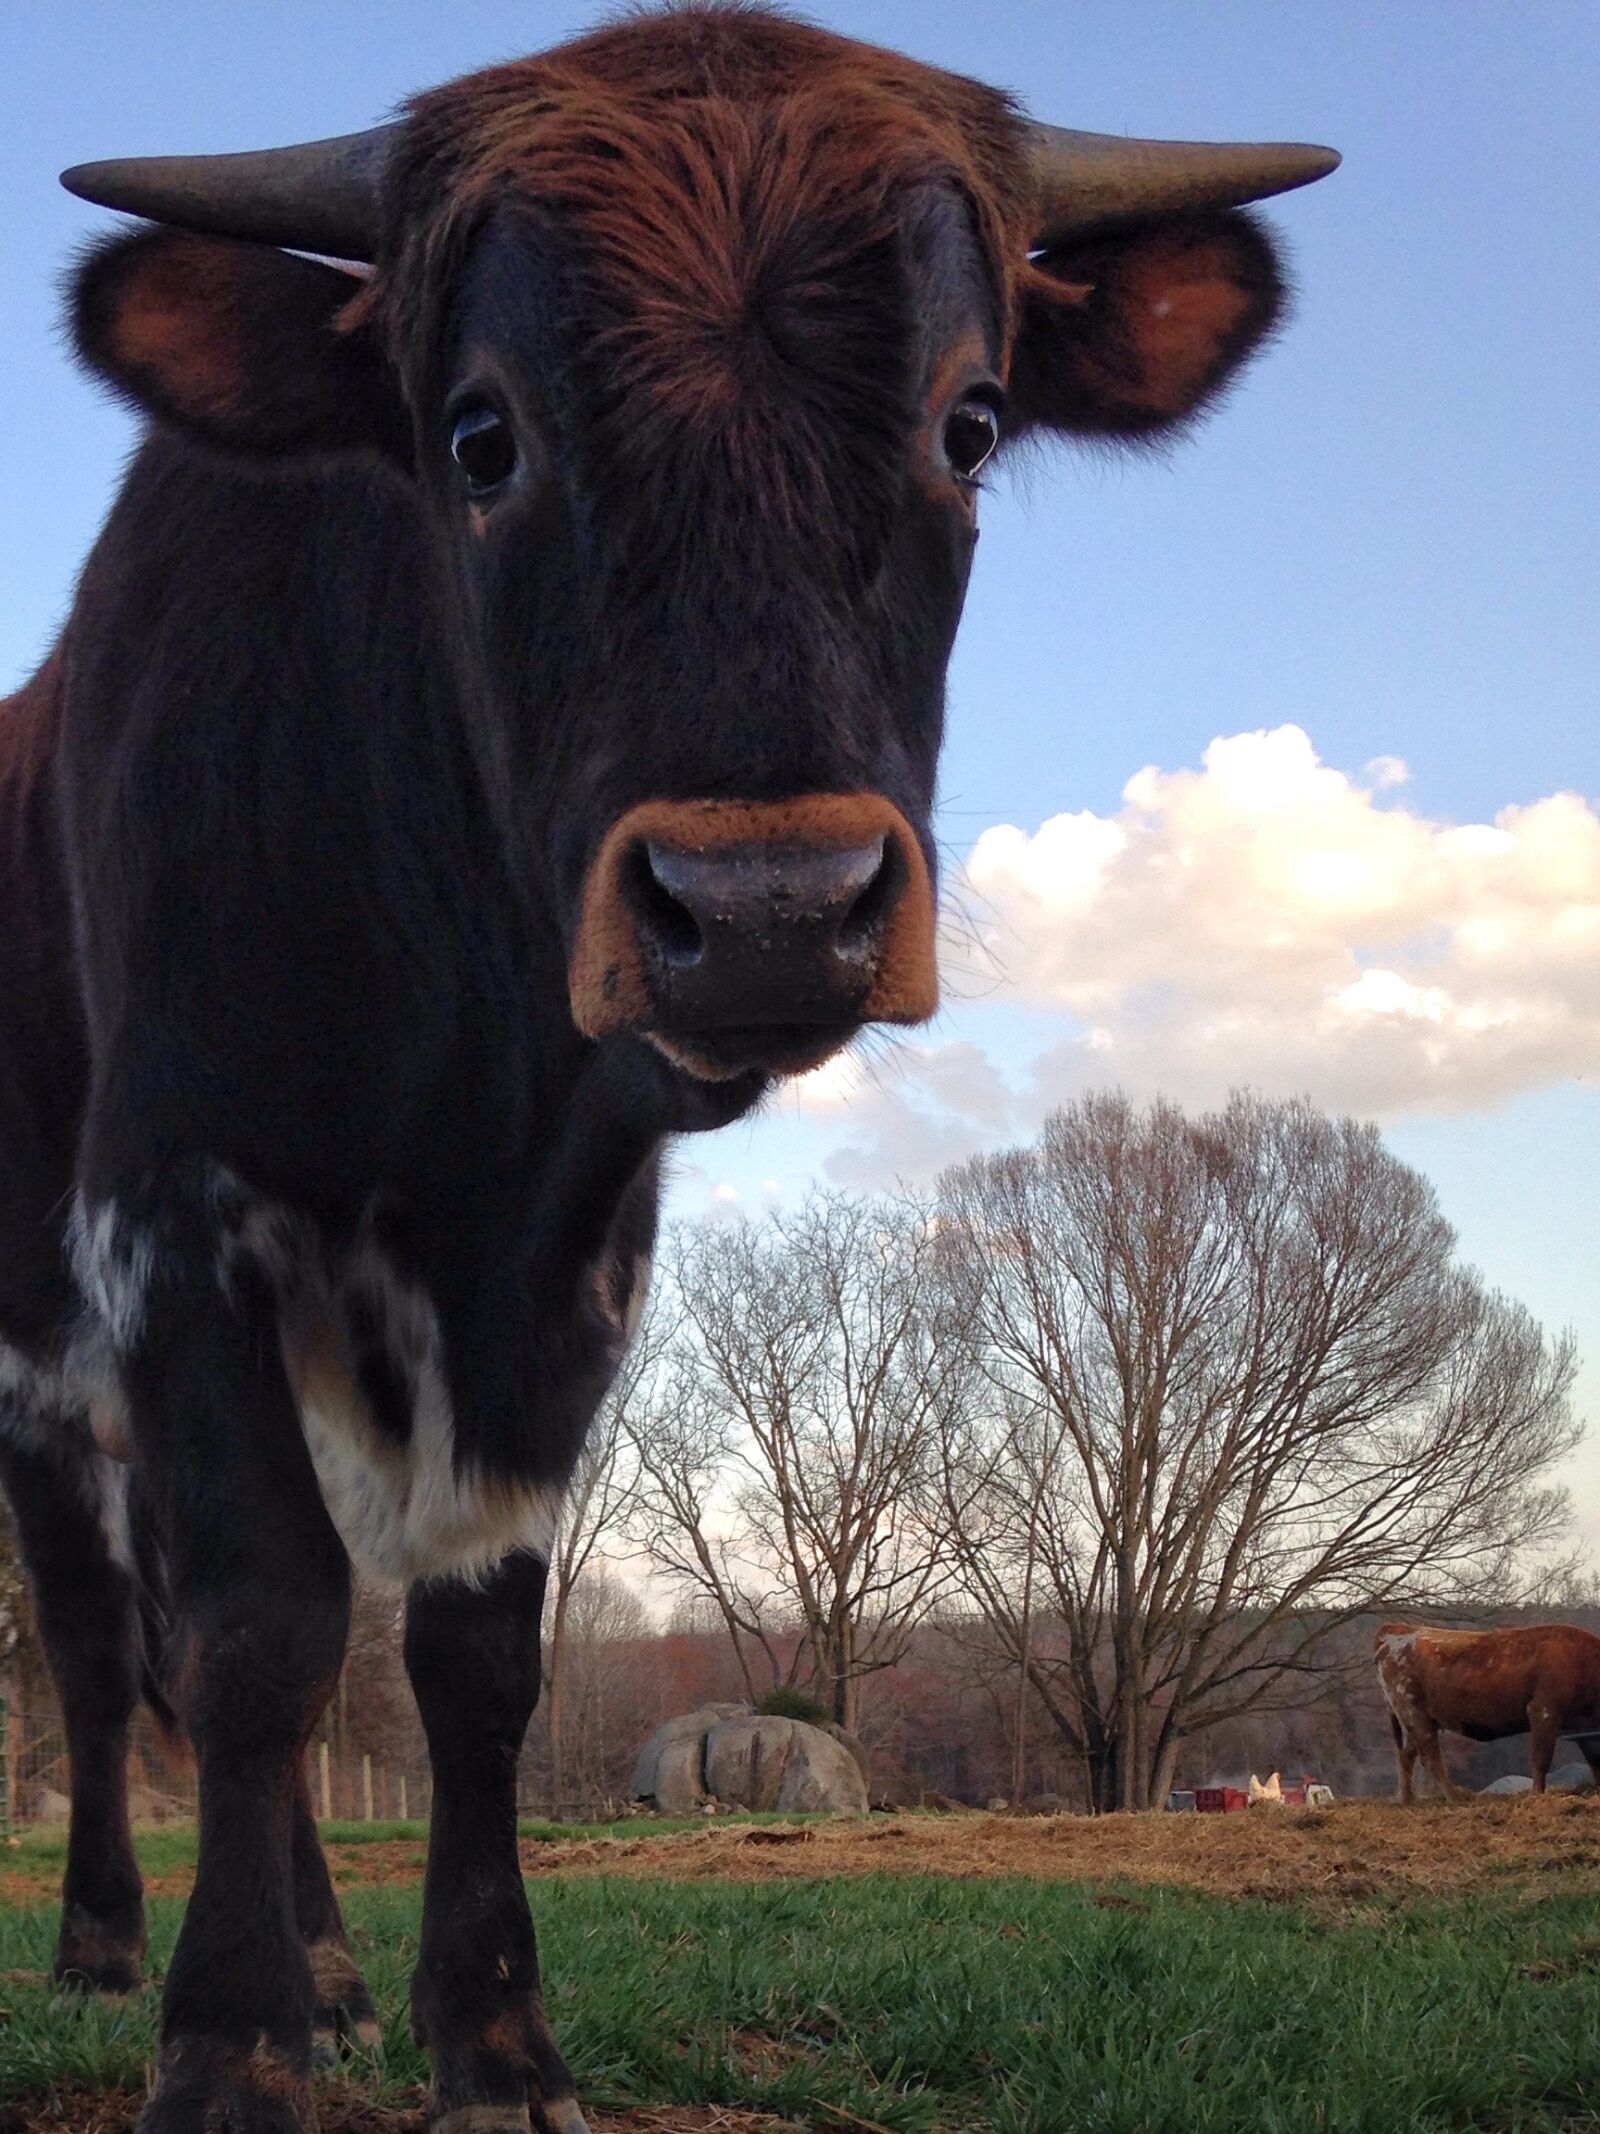 Apple iPhone 5c sample photo. Cow, cattle, mammal photography